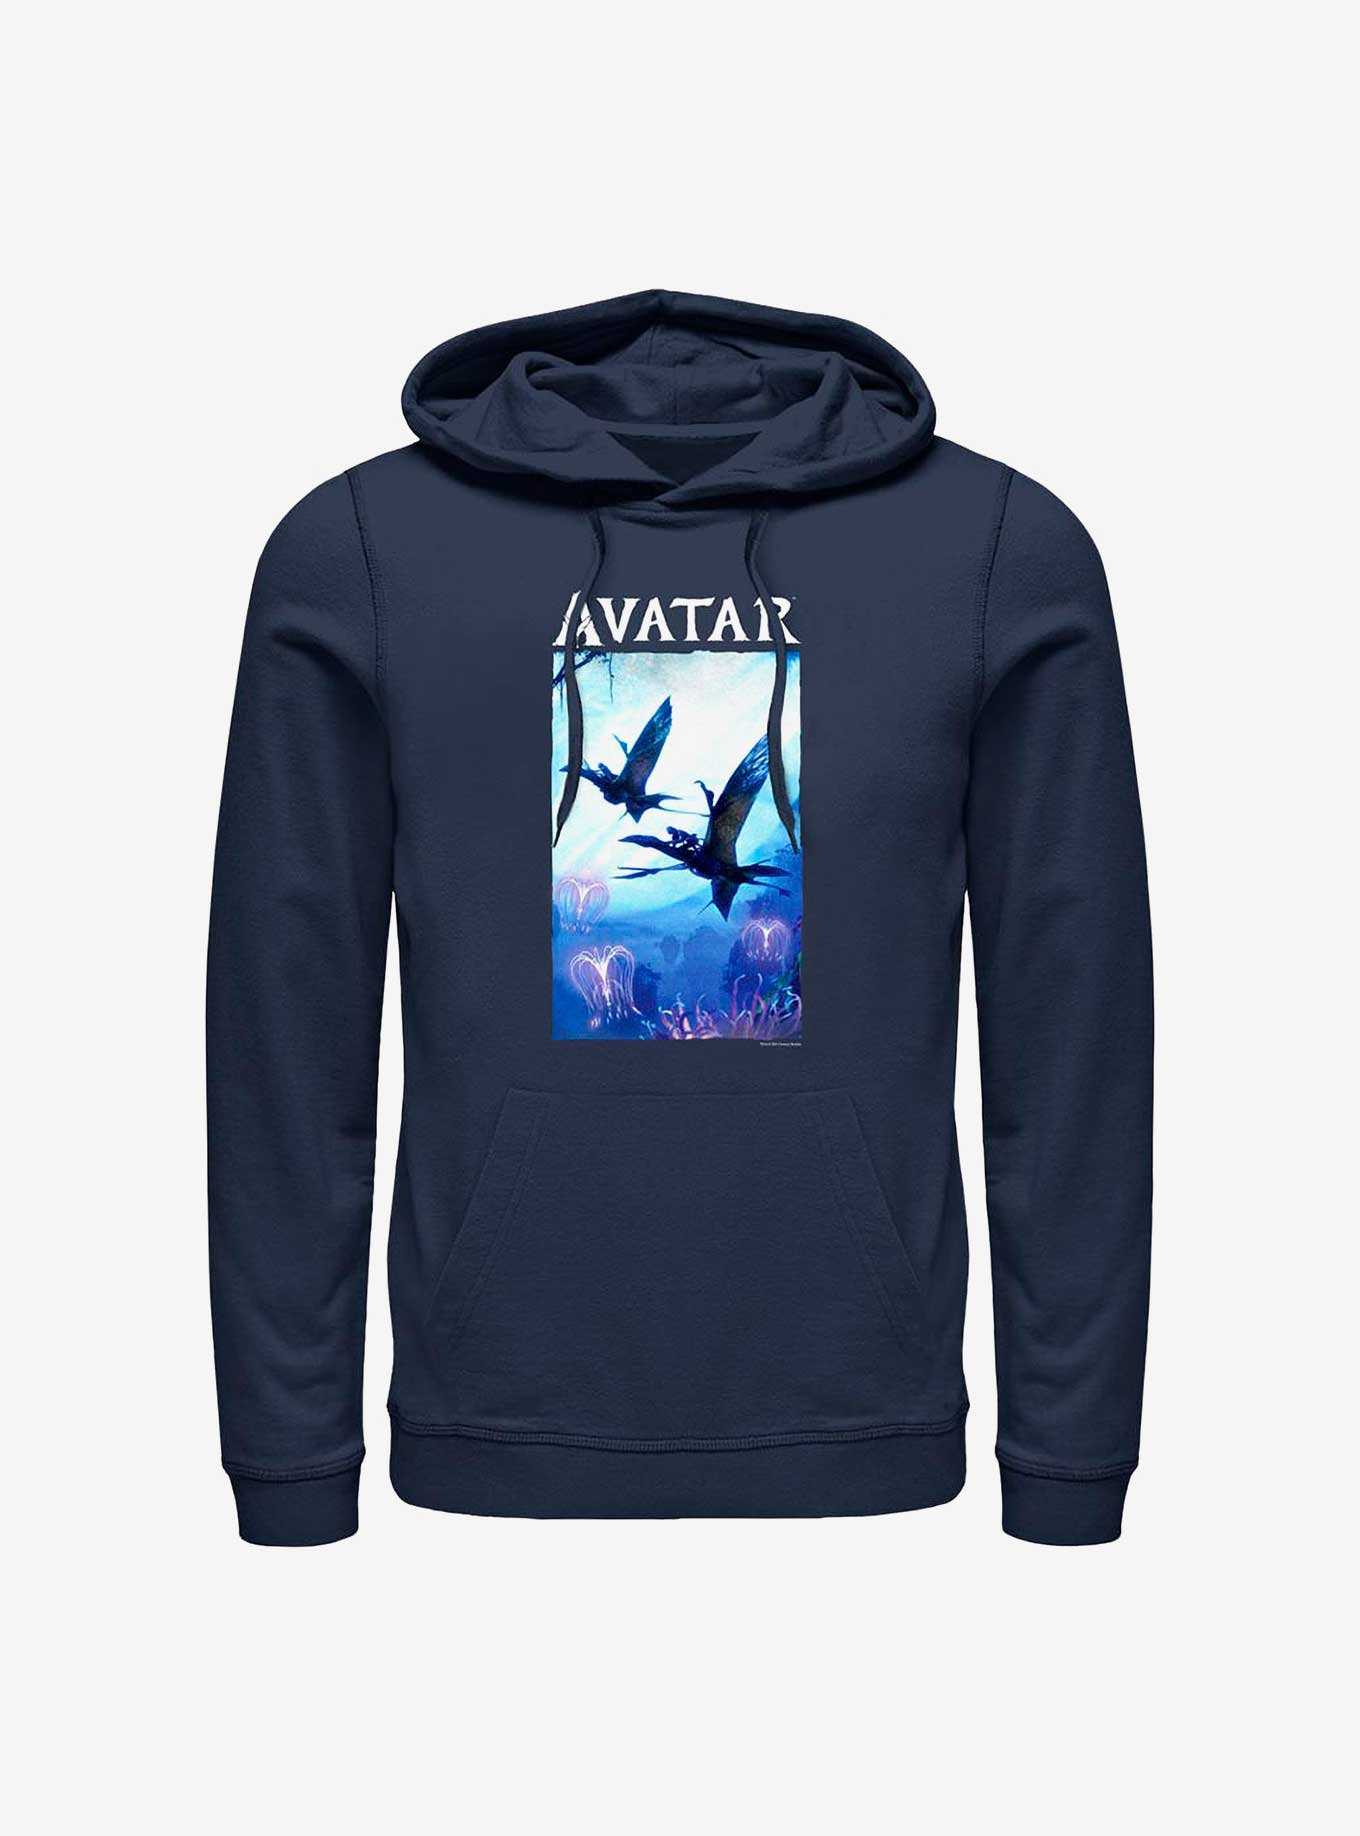 Avatar: The Way of Water Air Time Poster Hoodie, , hi-res